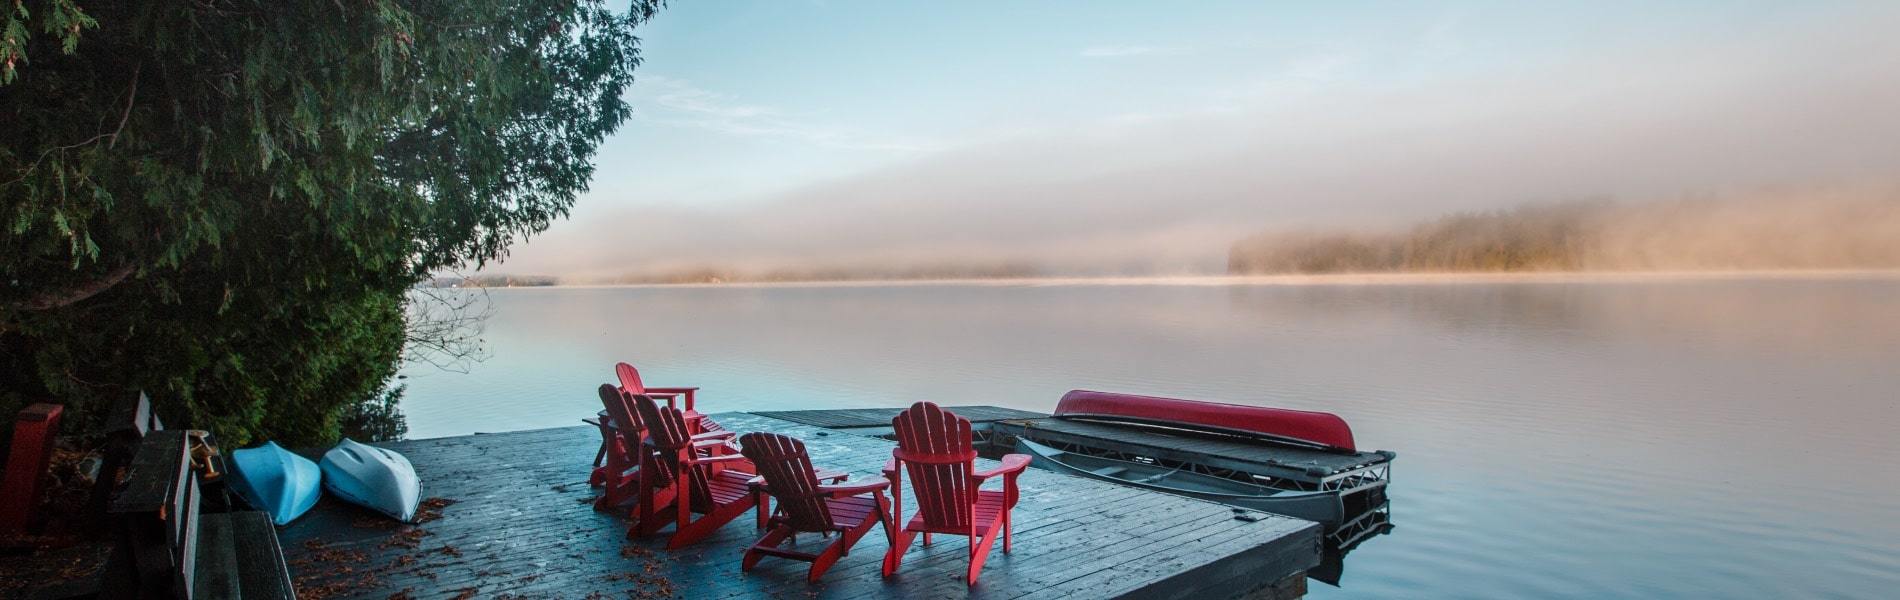 Chairs on a dock overlooking the water in Head Lake, Ontario